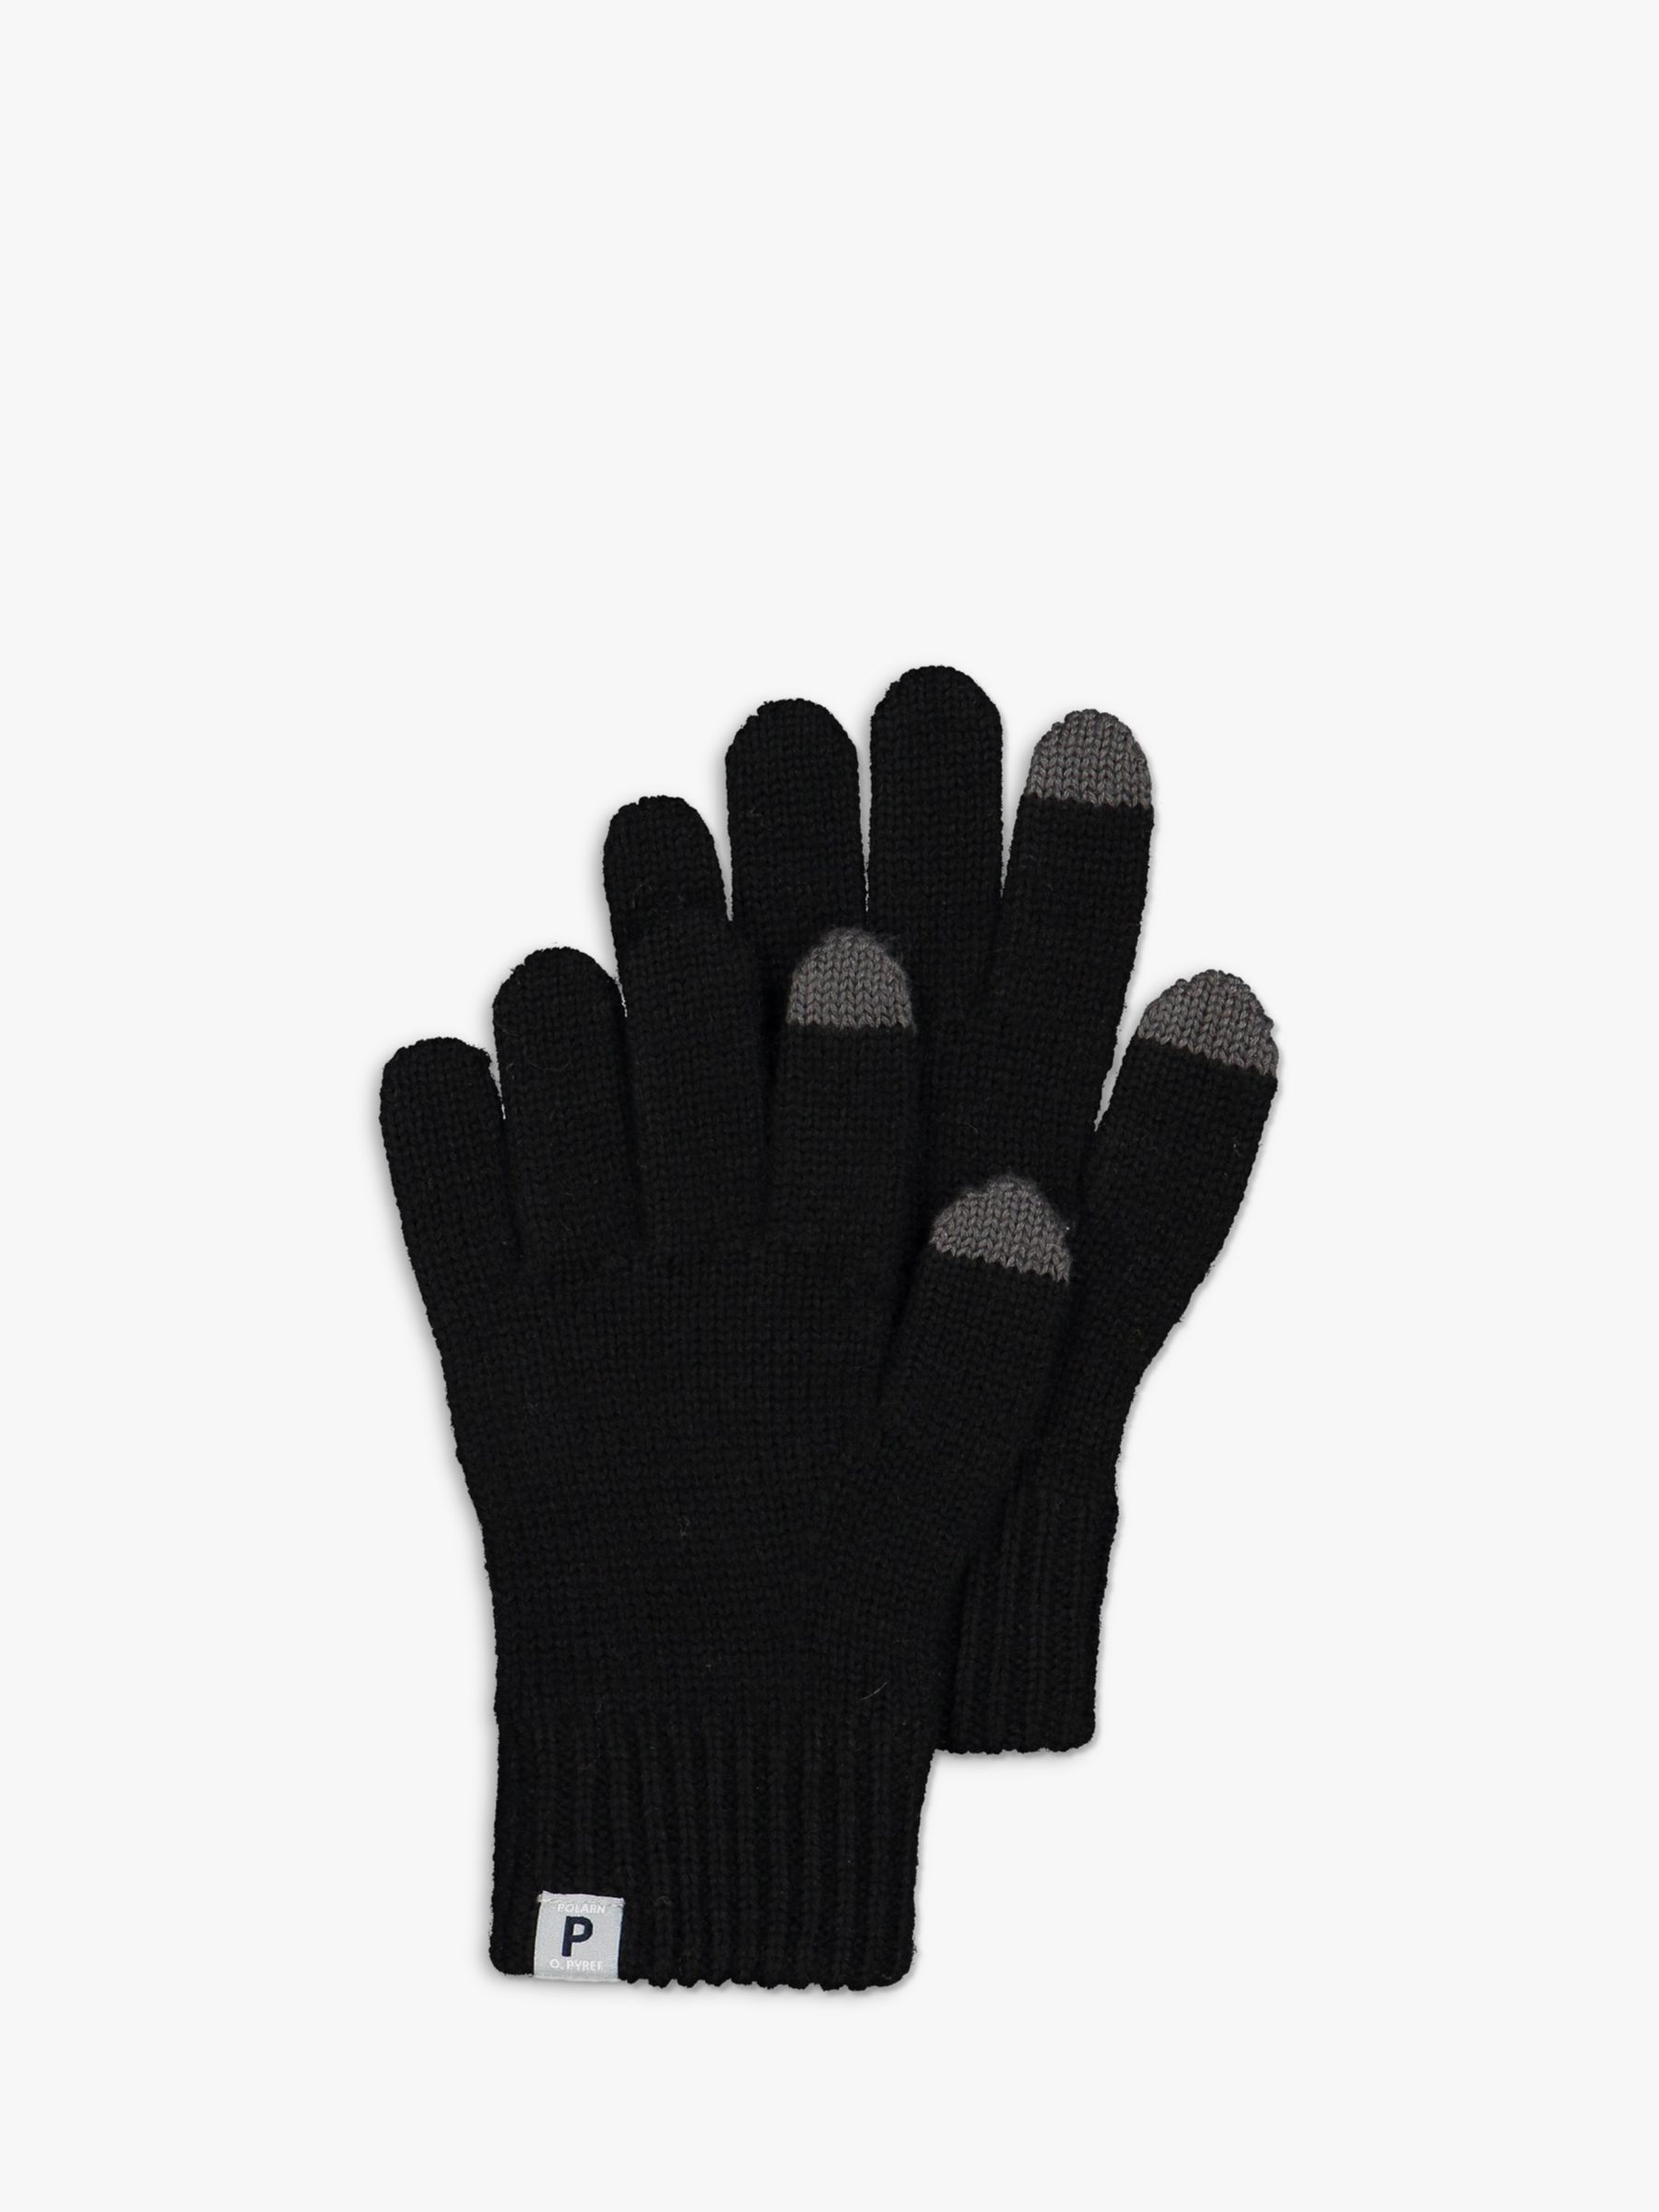 Polarn O. Pyret Kids' Wool Touch Gloves, Black, 2-4 years